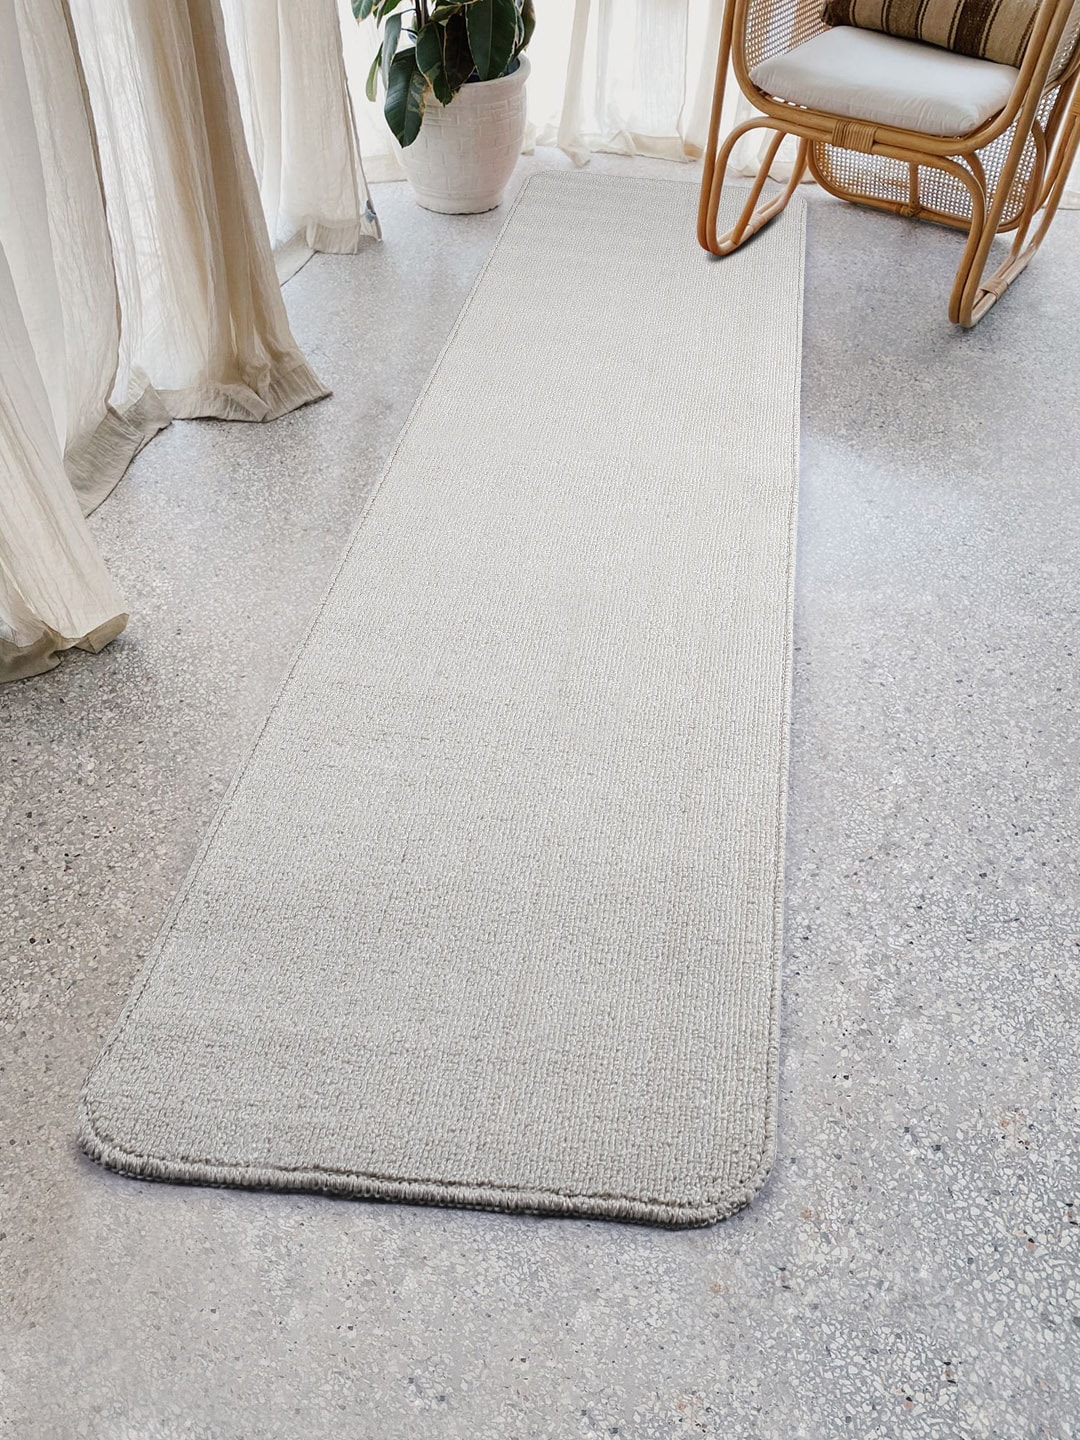 Saral Home Beige Solid Ivory Anti Skid Floor Runner Price in India